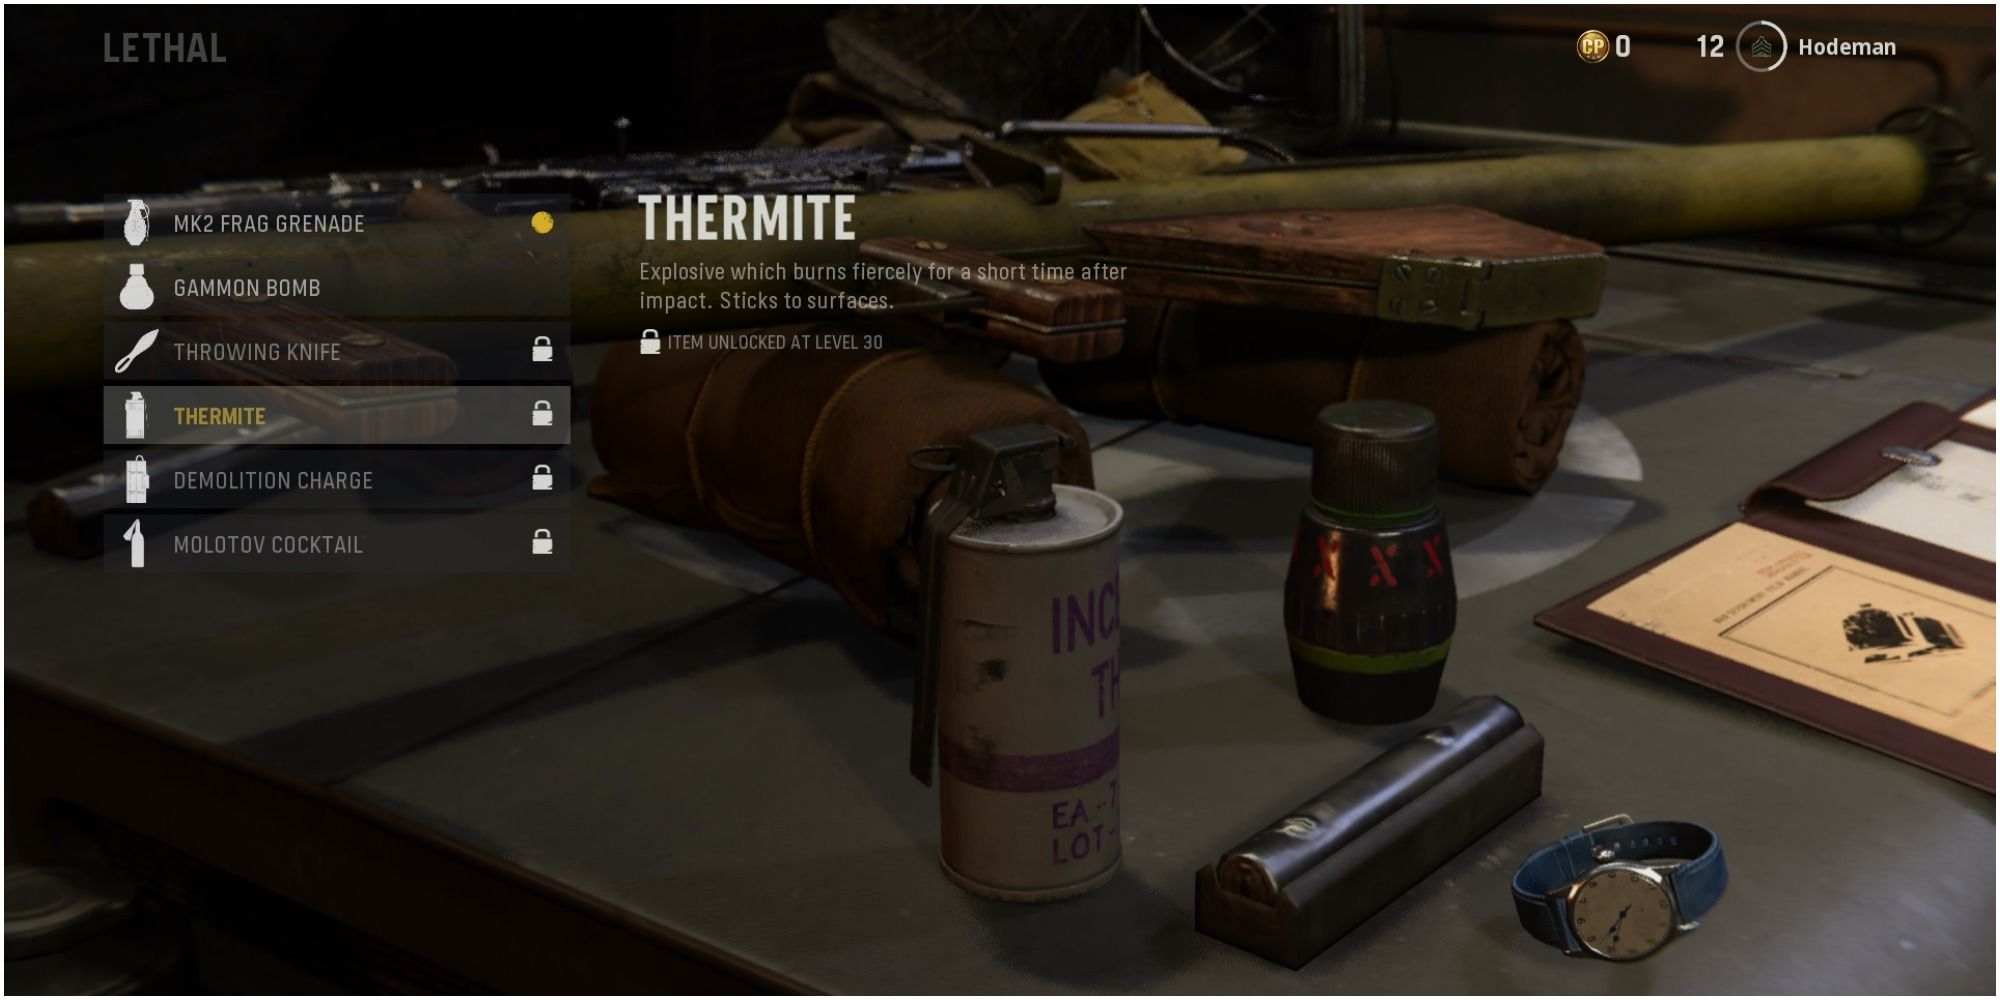 Call Of Duty Vanguard Reading The Lethal Thermite Description